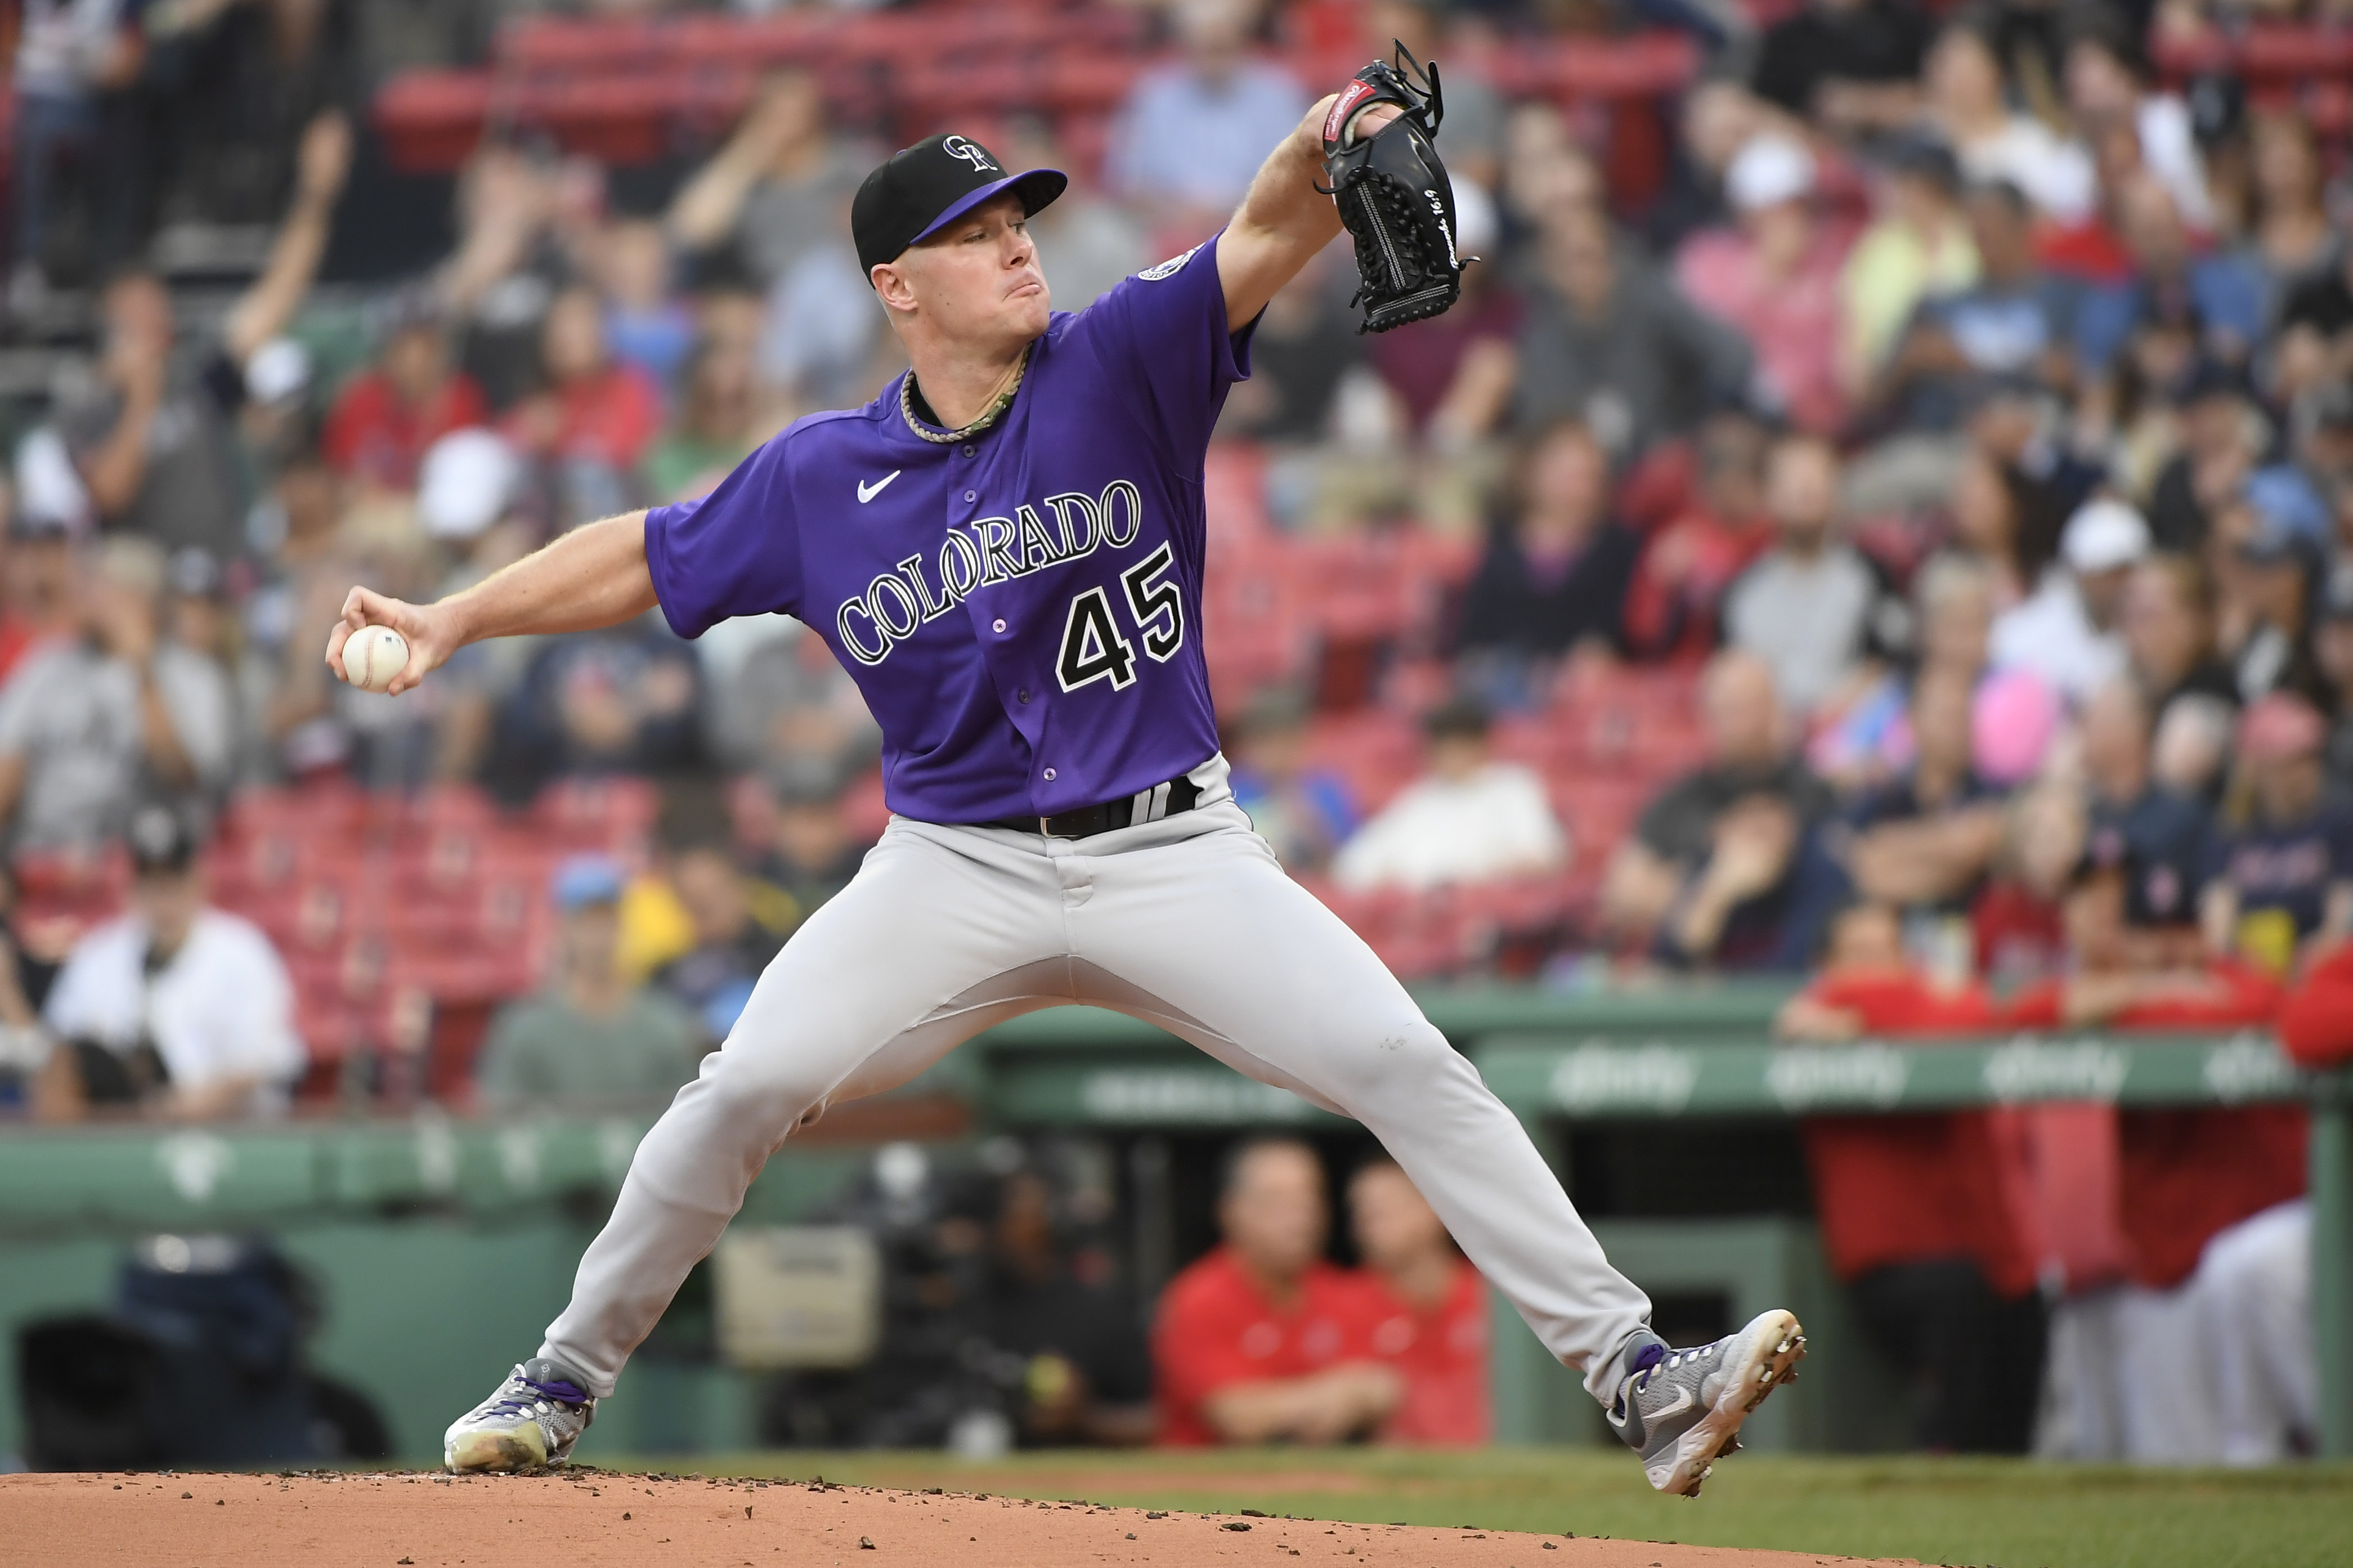 Rockies beat Red Sox, 4-3, in their first extra-inning game of season